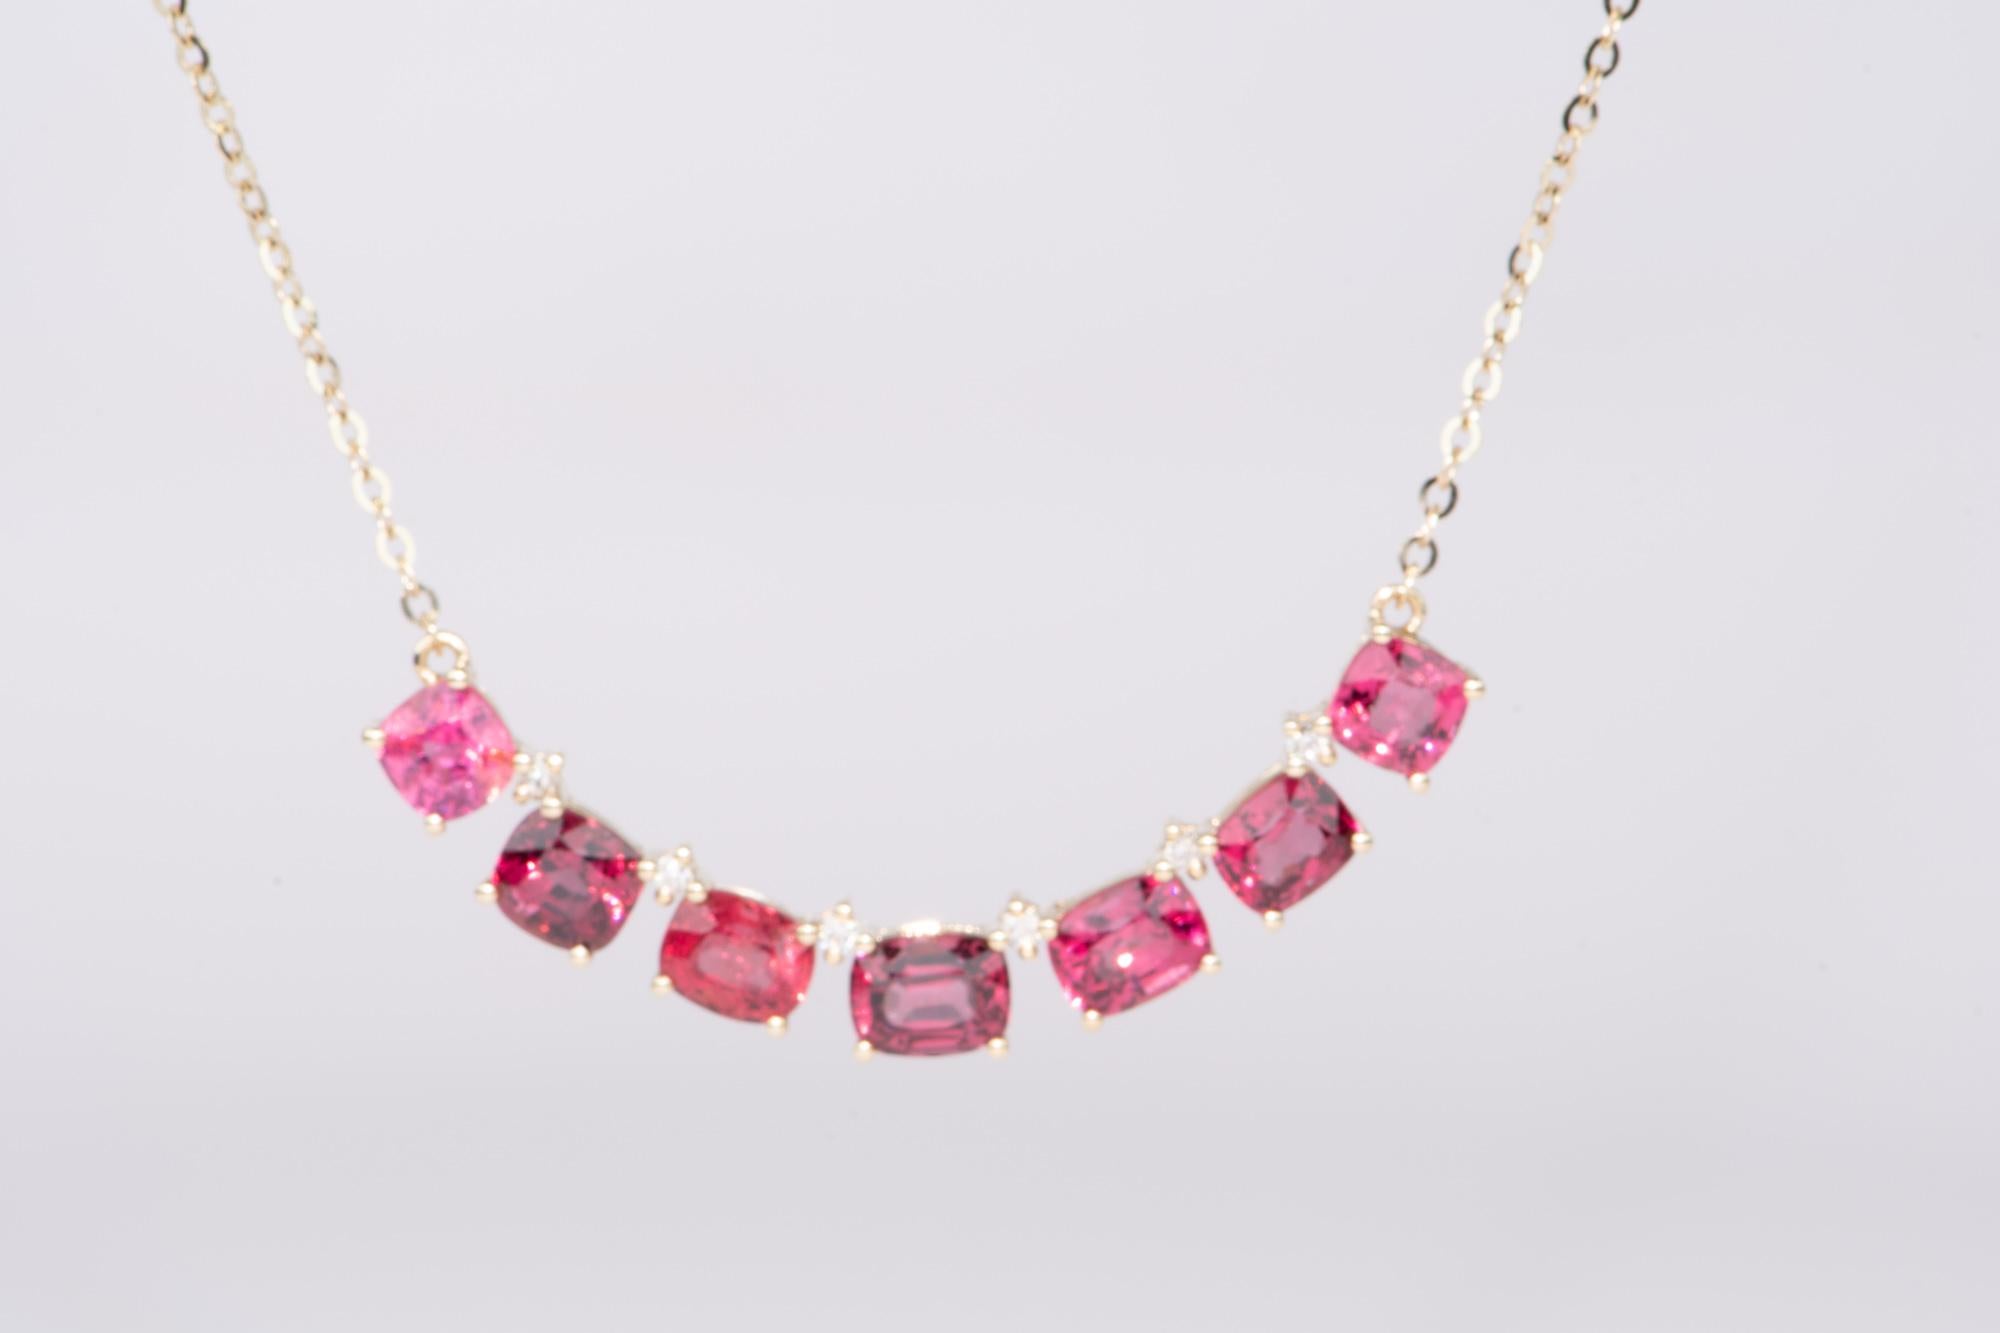 ♥ Bright Pink Red Spinel and Diamond Necklace 14K Gold
♥ The necklace measures 18